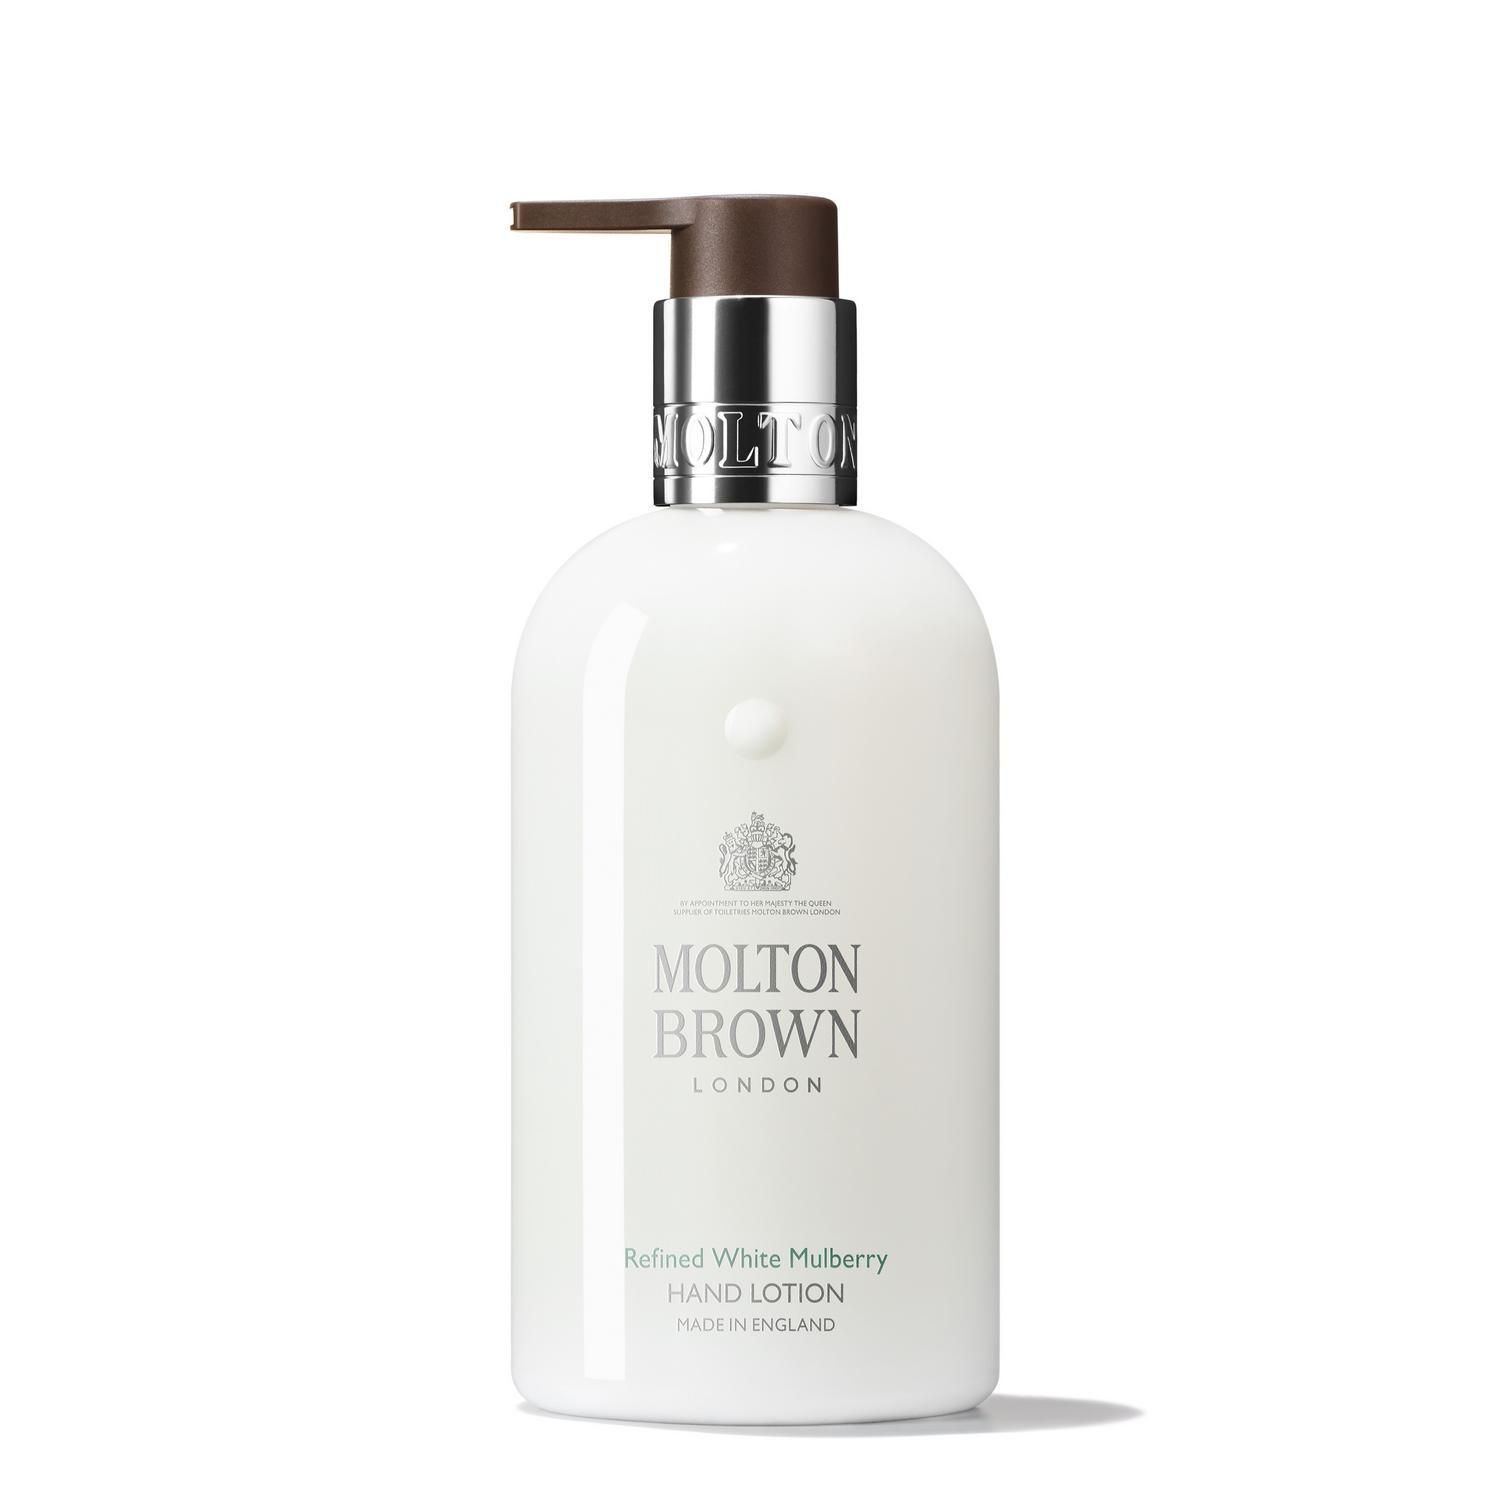 Molton Brown White Mulberry Hand Lotion 300ml